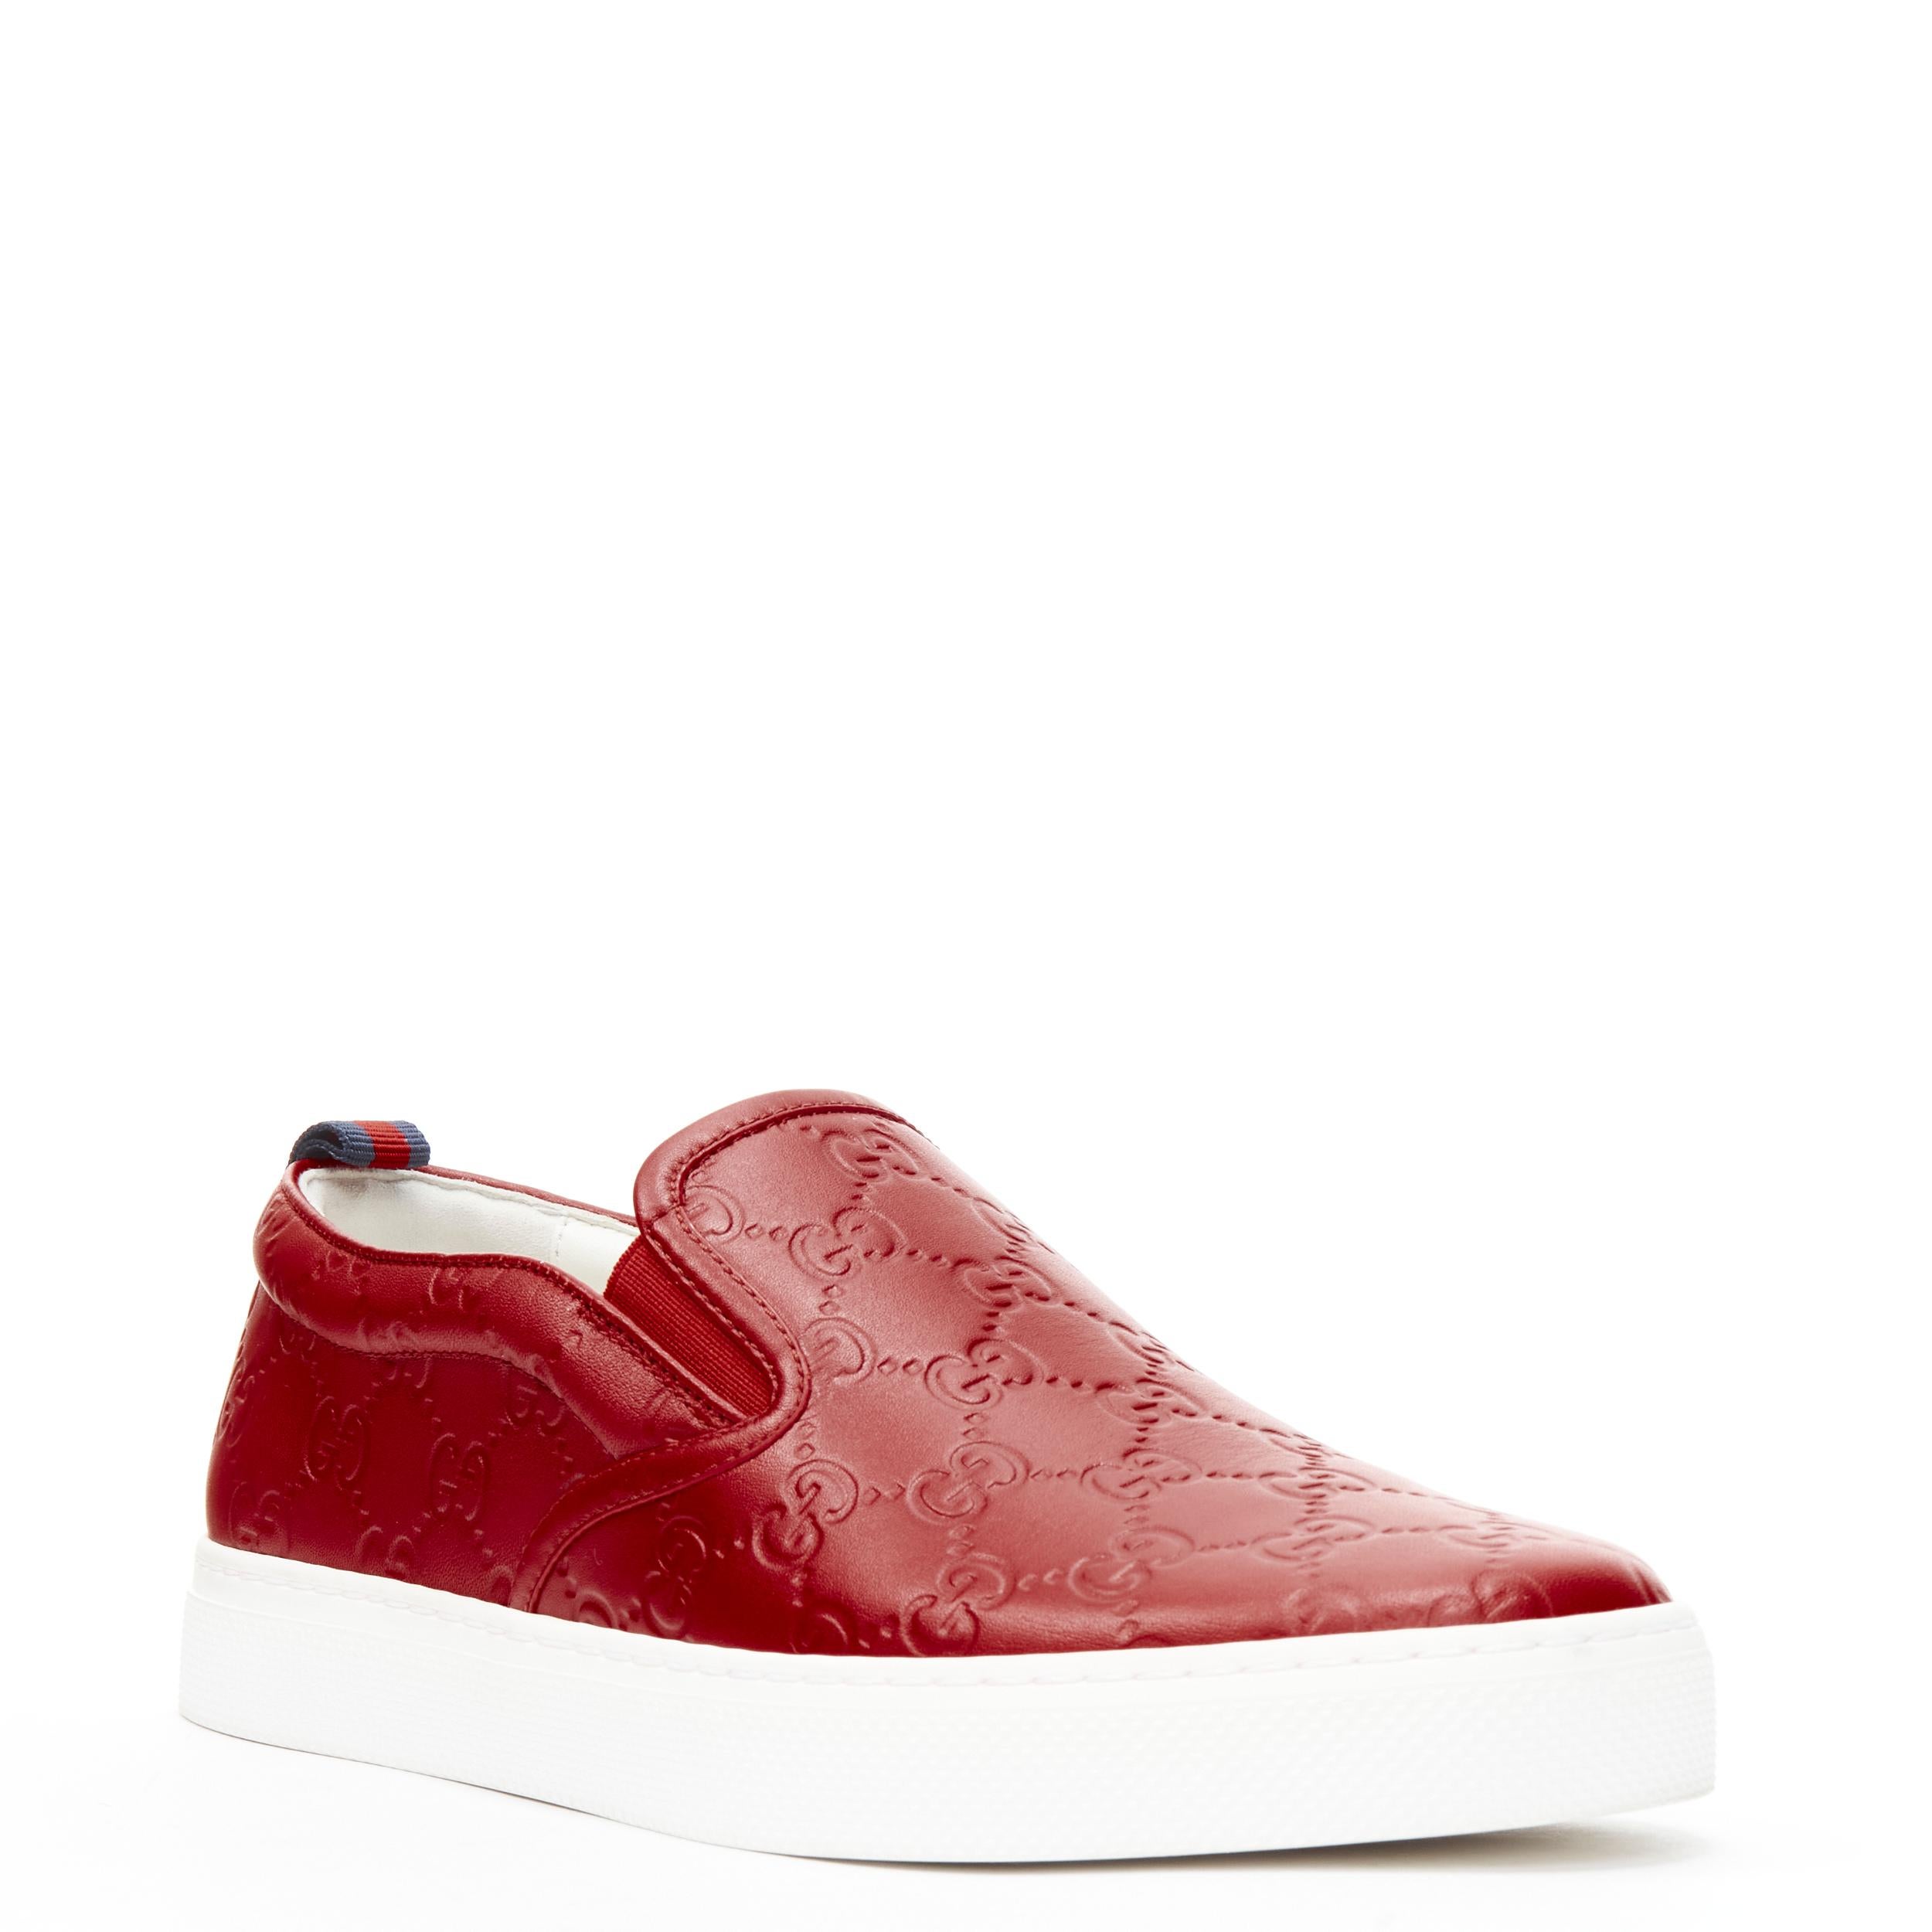 new GUCCI 407364 GG Monogram emboss leather slip on skate sneakers UK6 EU40 
Reference: TGAS/B02166 
Brand: Gucci 
Designer: Alessandro Michele 
Model: 407364 
Material: Leather 
Color: Red 
Pattern: Solid 
Extra Detail: 407364. Red Gucci embossed